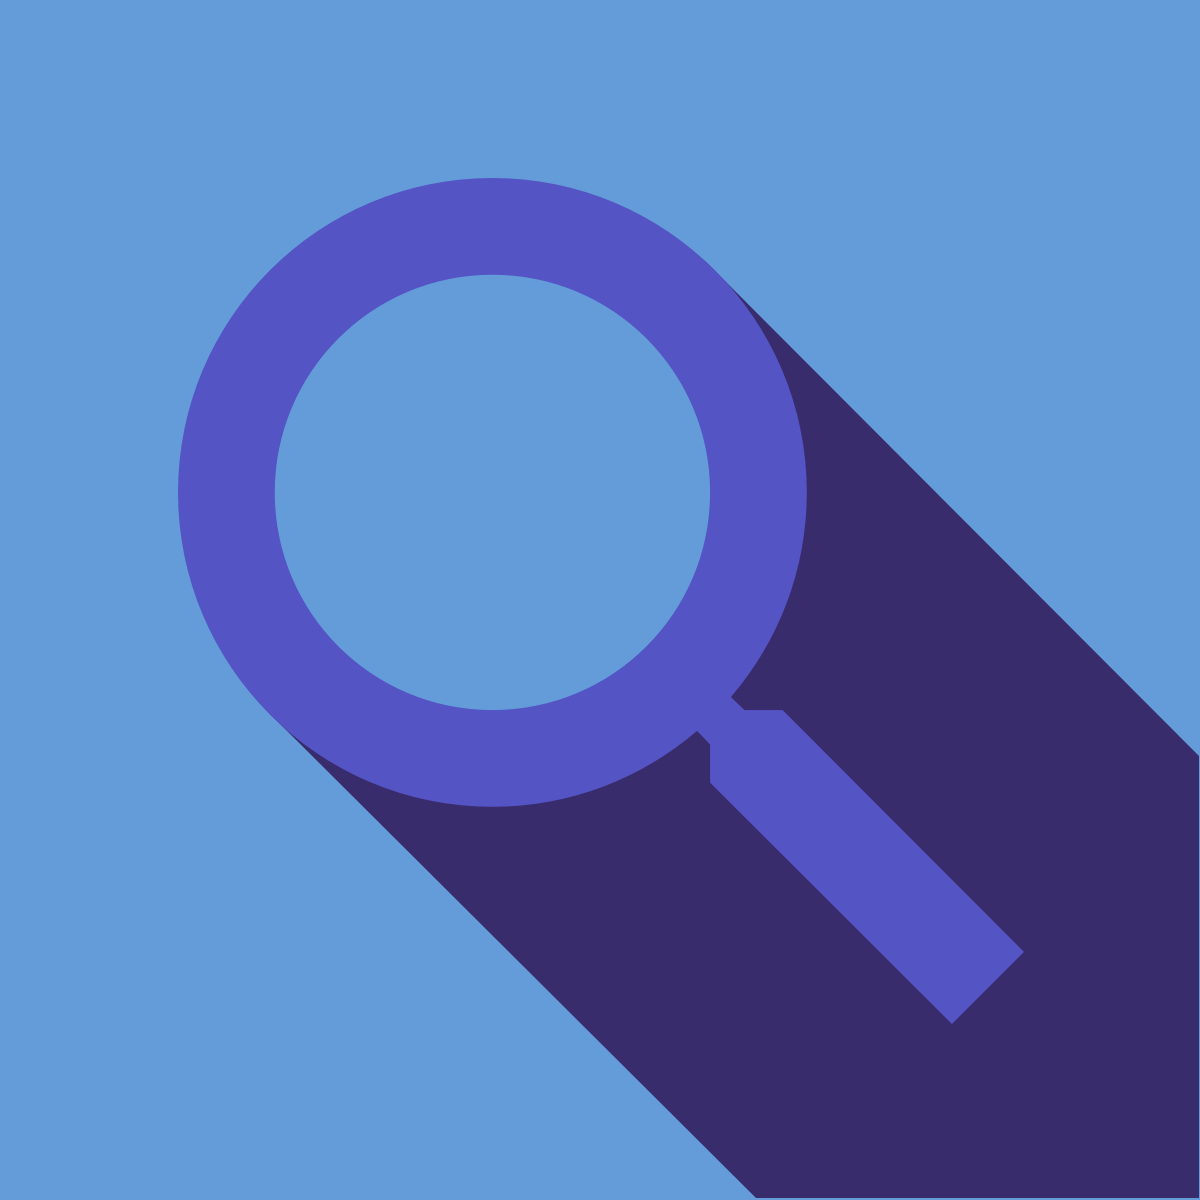 magnifying glass as a symbol representing seo for web apps